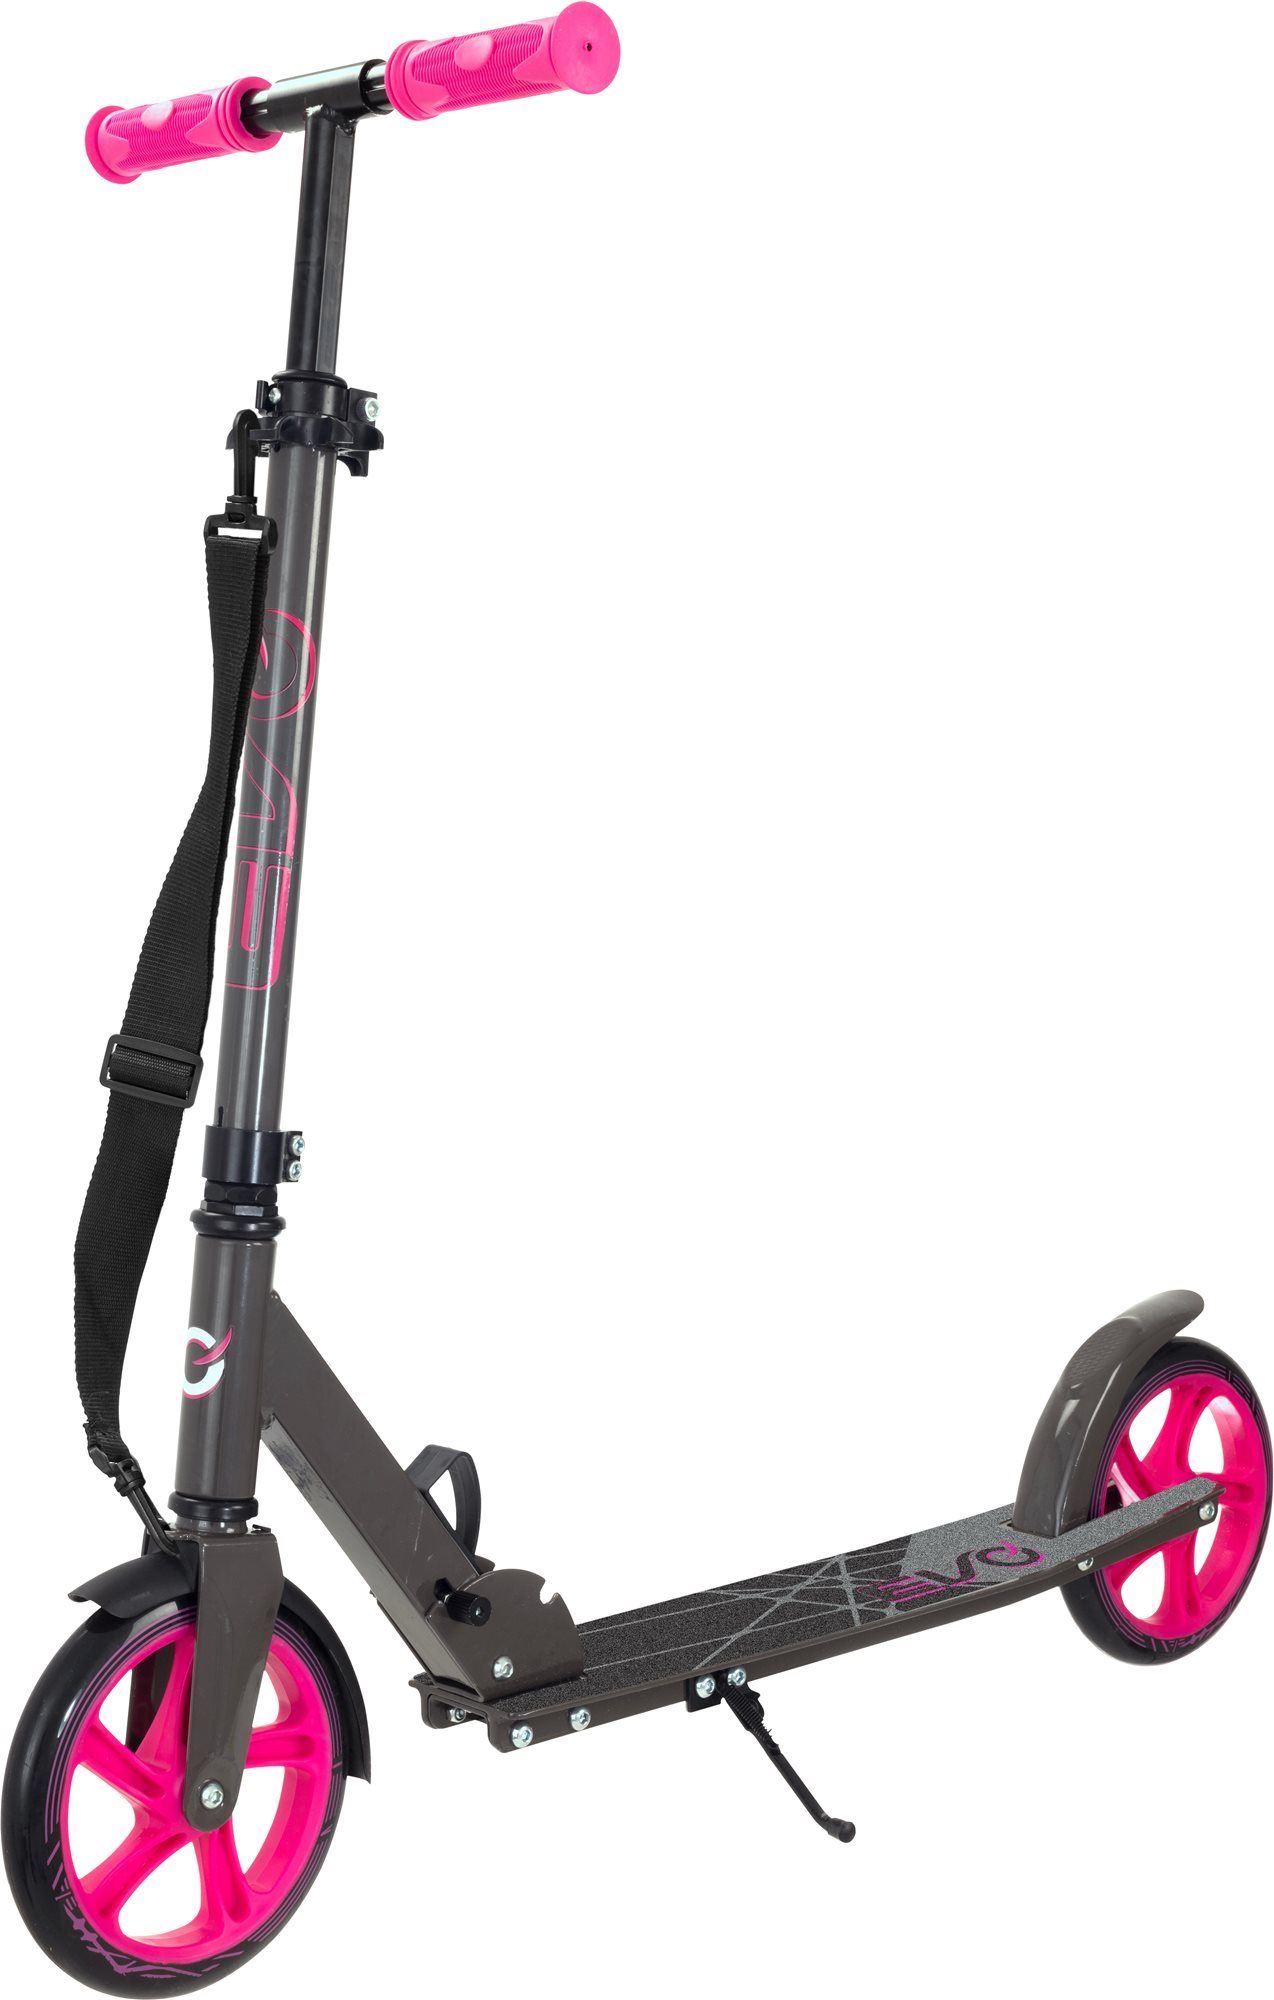 Evo Flexi Scooter Max Pink 200 mm